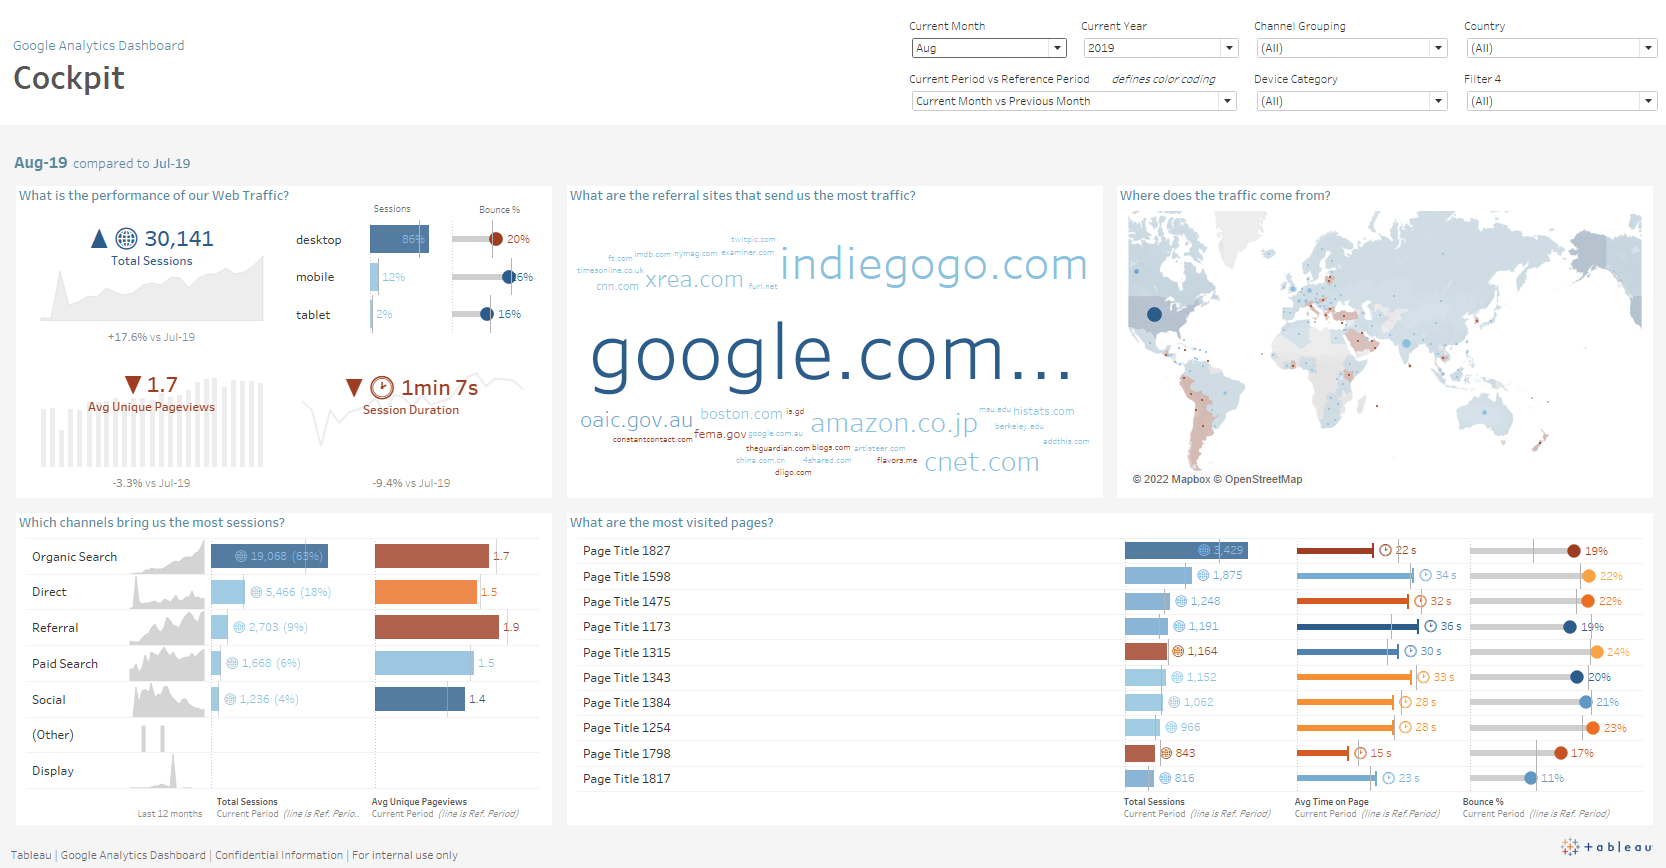 Image of Web traffic dashboard created with the Google Analytics Accelerator